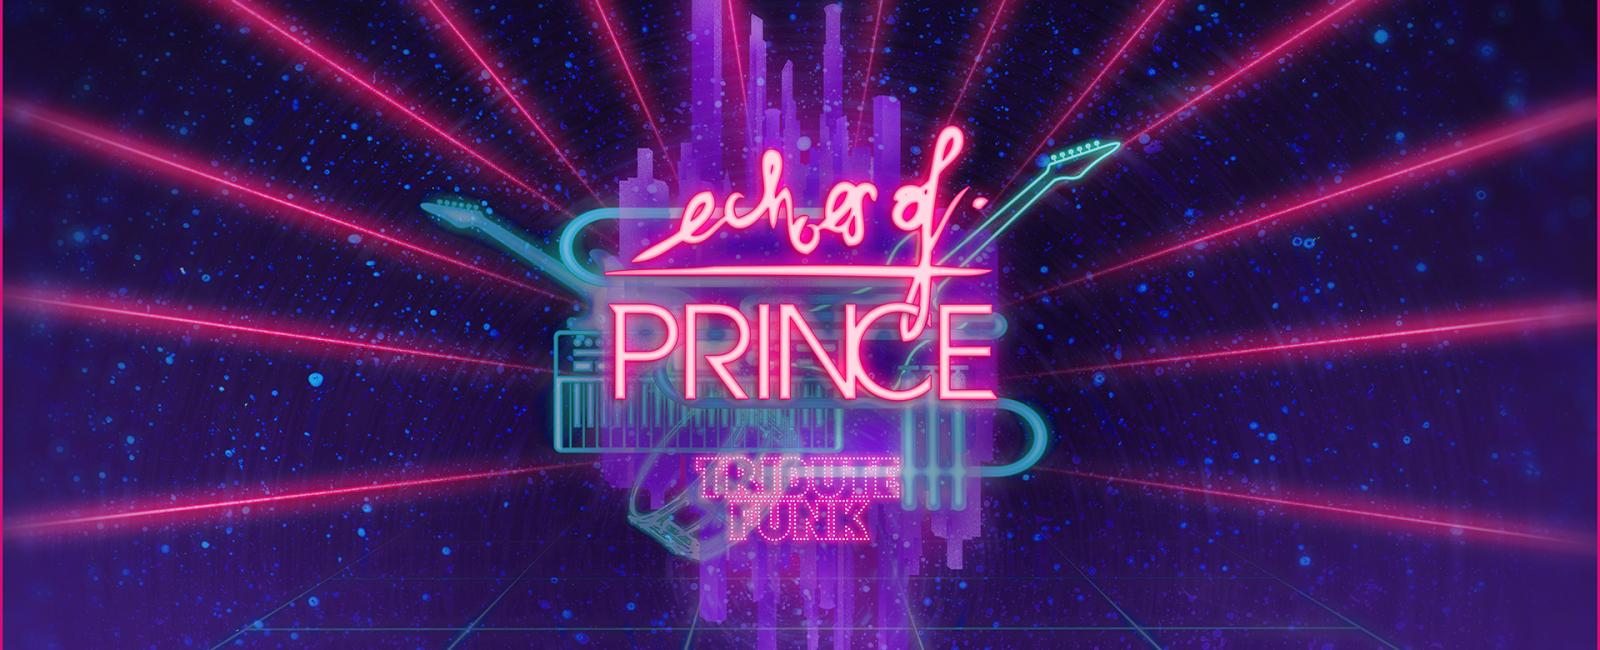 Echoes_of_Prince 